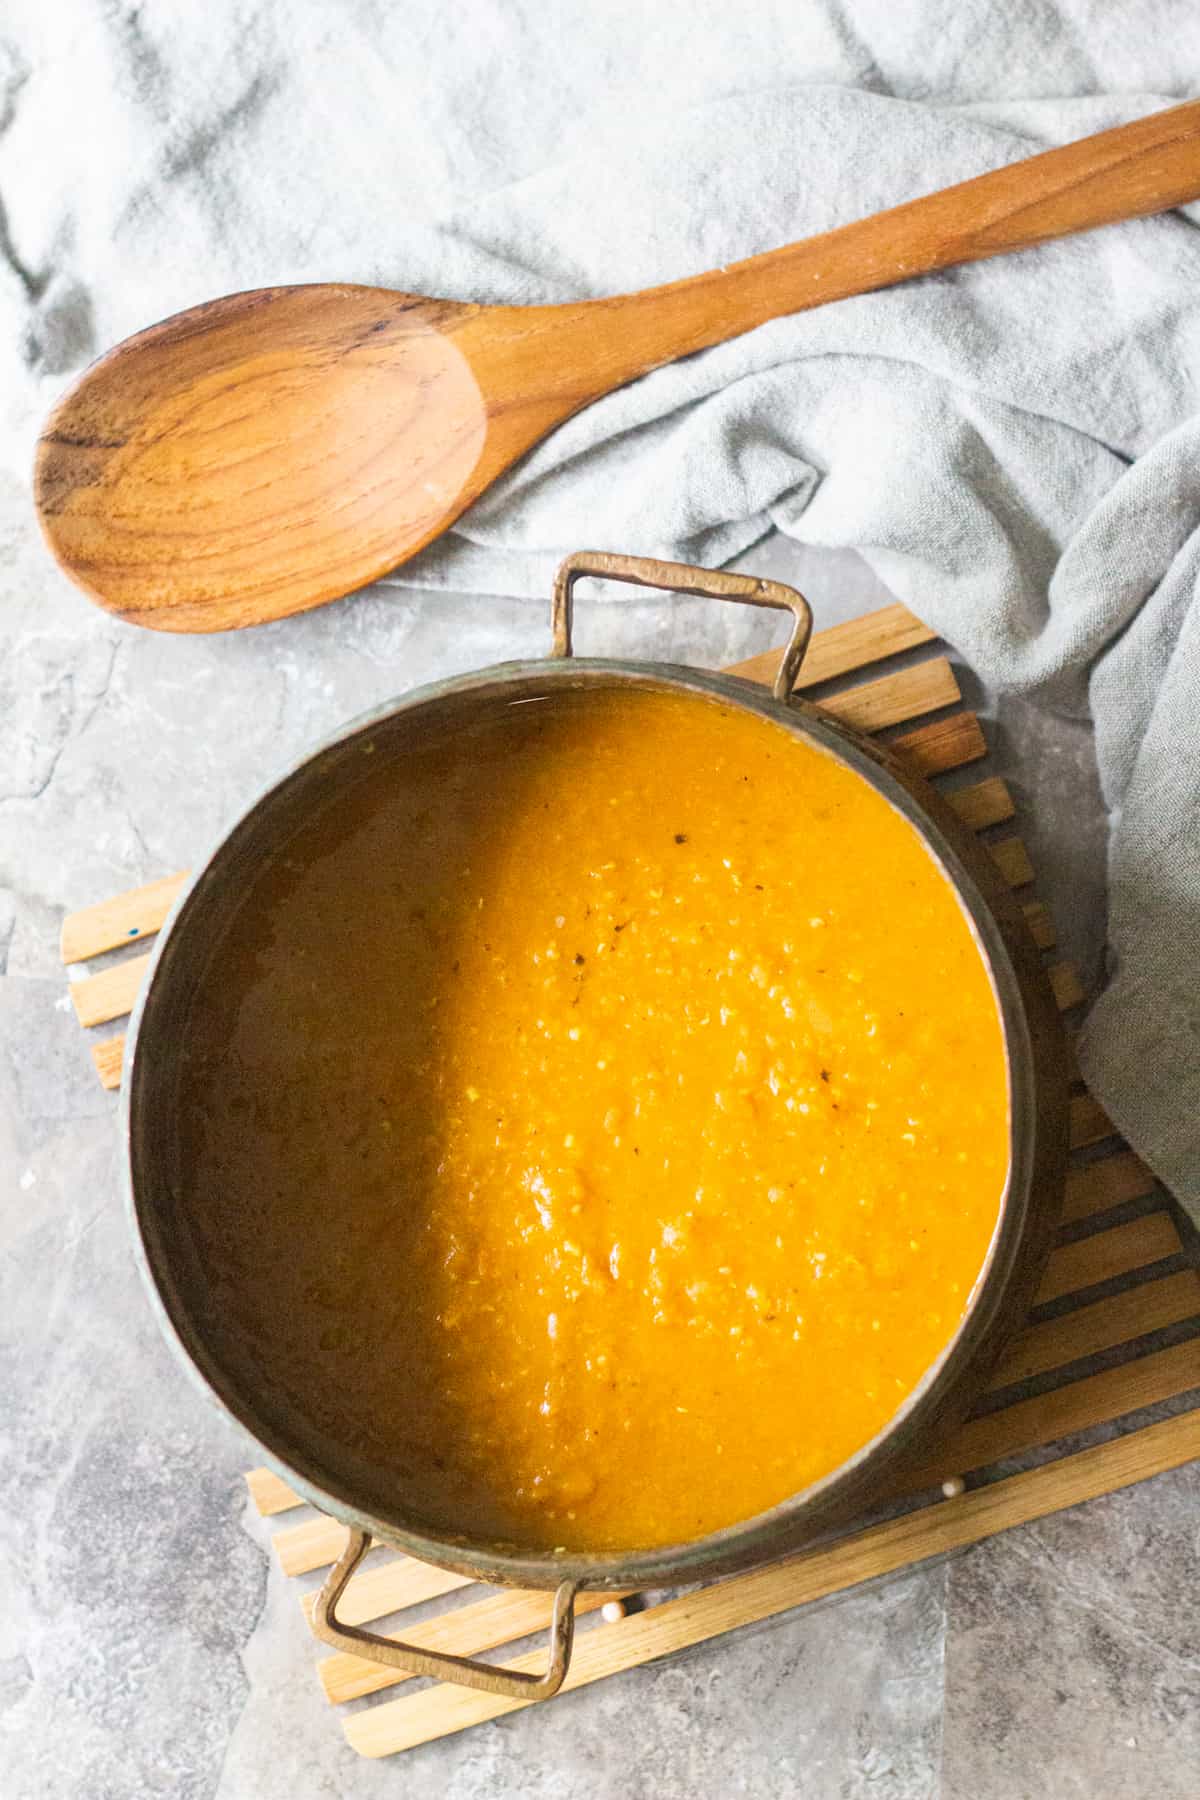 To make curry red lentil soup cook the lentils with onion and garlic until they're tender.